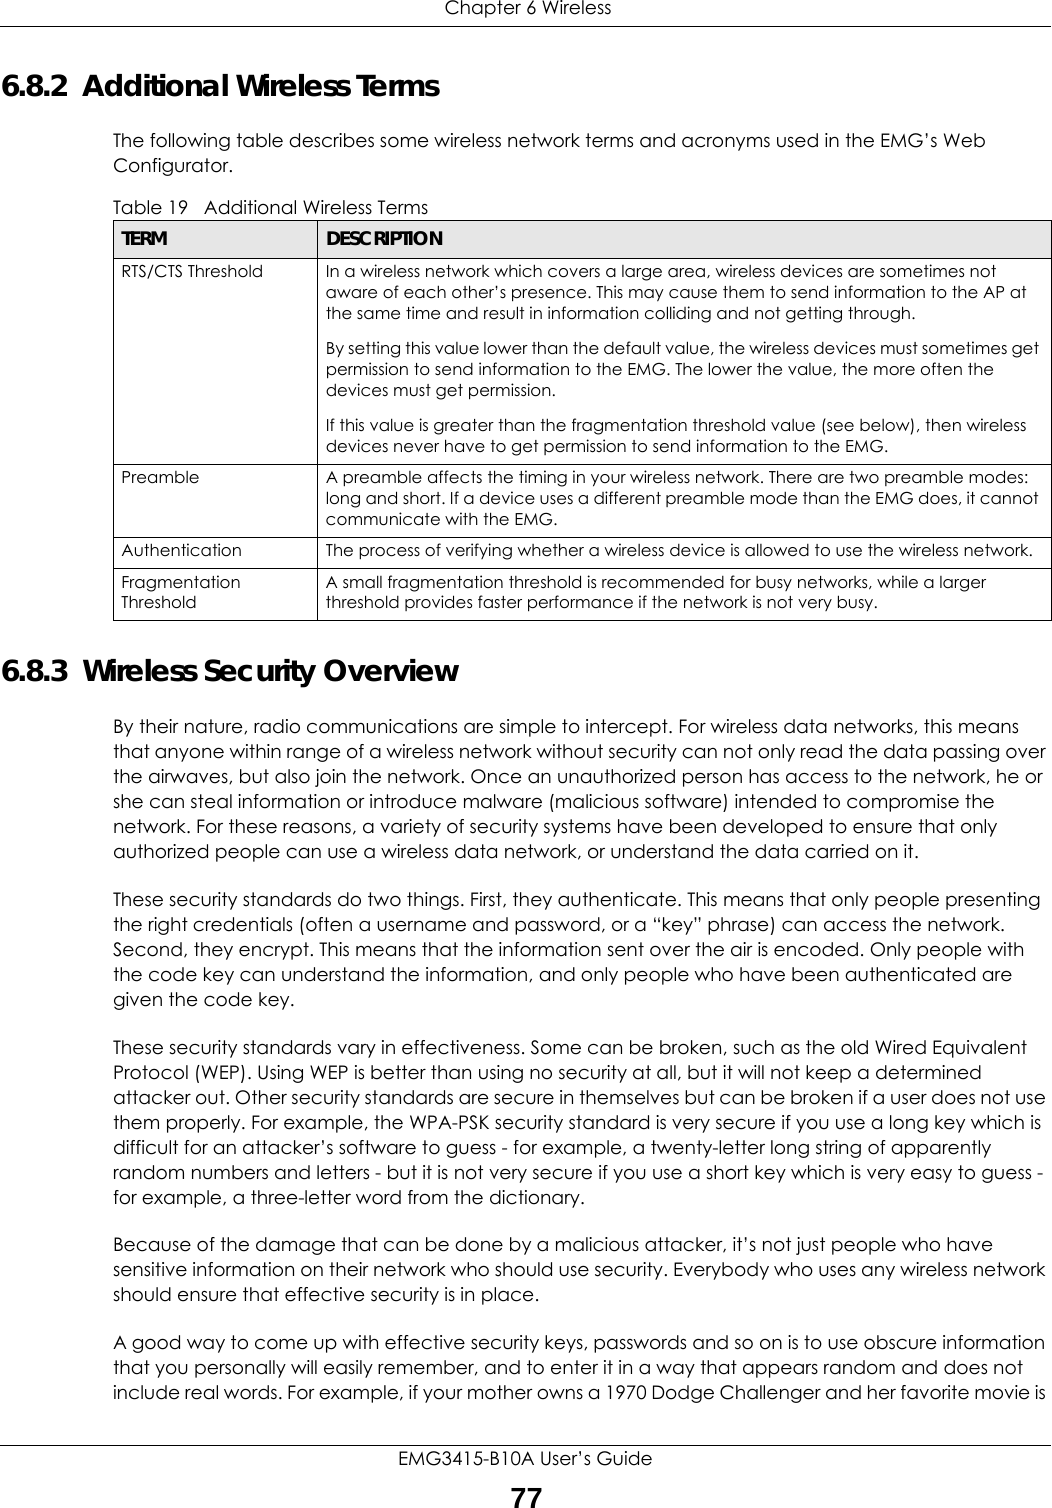  Chapter 6 WirelessEMG3415-B10A User’s Guide776.8.2  Additional Wireless TermsThe following table describes some wireless network terms and acronyms used in the EMG’s Web Configurator.6.8.3  Wireless Security OverviewBy their nature, radio communications are simple to intercept. For wireless data networks, this means that anyone within range of a wireless network without security can not only read the data passing over the airwaves, but also join the network. Once an unauthorized person has access to the network, he or she can steal information or introduce malware (malicious software) intended to compromise the network. For these reasons, a variety of security systems have been developed to ensure that only authorized people can use a wireless data network, or understand the data carried on it.These security standards do two things. First, they authenticate. This means that only people presenting the right credentials (often a username and password, or a “key” phrase) can access the network. Second, they encrypt. This means that the information sent over the air is encoded. Only people with the code key can understand the information, and only people who have been authenticated are given the code key.These security standards vary in effectiveness. Some can be broken, such as the old Wired Equivalent Protocol (WEP). Using WEP is better than using no security at all, but it will not keep a determined attacker out. Other security standards are secure in themselves but can be broken if a user does not use them properly. For example, the WPA-PSK security standard is very secure if you use a long key which is difficult for an attacker’s software to guess - for example, a twenty-letter long string of apparently random numbers and letters - but it is not very secure if you use a short key which is very easy to guess - for example, a three-letter word from the dictionary.Because of the damage that can be done by a malicious attacker, it’s not just people who have sensitive information on their network who should use security. Everybody who uses any wireless network should ensure that effective security is in place.A good way to come up with effective security keys, passwords and so on is to use obscure information that you personally will easily remember, and to enter it in a way that appears random and does not include real words. For example, if your mother owns a 1970 Dodge Challenger and her favorite movie is Table 19   Additional Wireless TermsTERM DESCRIPTIONRTS/CTS Threshold In a wireless network which covers a large area, wireless devices are sometimes not aware of each other’s presence. This may cause them to send information to the AP at the same time and result in information colliding and not getting through.By setting this value lower than the default value, the wireless devices must sometimes get permission to send information to the EMG. The lower the value, the more often the devices must get permission.If this value is greater than the fragmentation threshold value (see below), then wireless devices never have to get permission to send information to the EMG.Preamble A preamble affects the timing in your wireless network. There are two preamble modes: long and short. If a device uses a different preamble mode than the EMG does, it cannot communicate with the EMG.Authentication The process of verifying whether a wireless device is allowed to use the wireless network.Fragmentation ThresholdA small fragmentation threshold is recommended for busy networks, while a larger threshold provides faster performance if the network is not very busy.